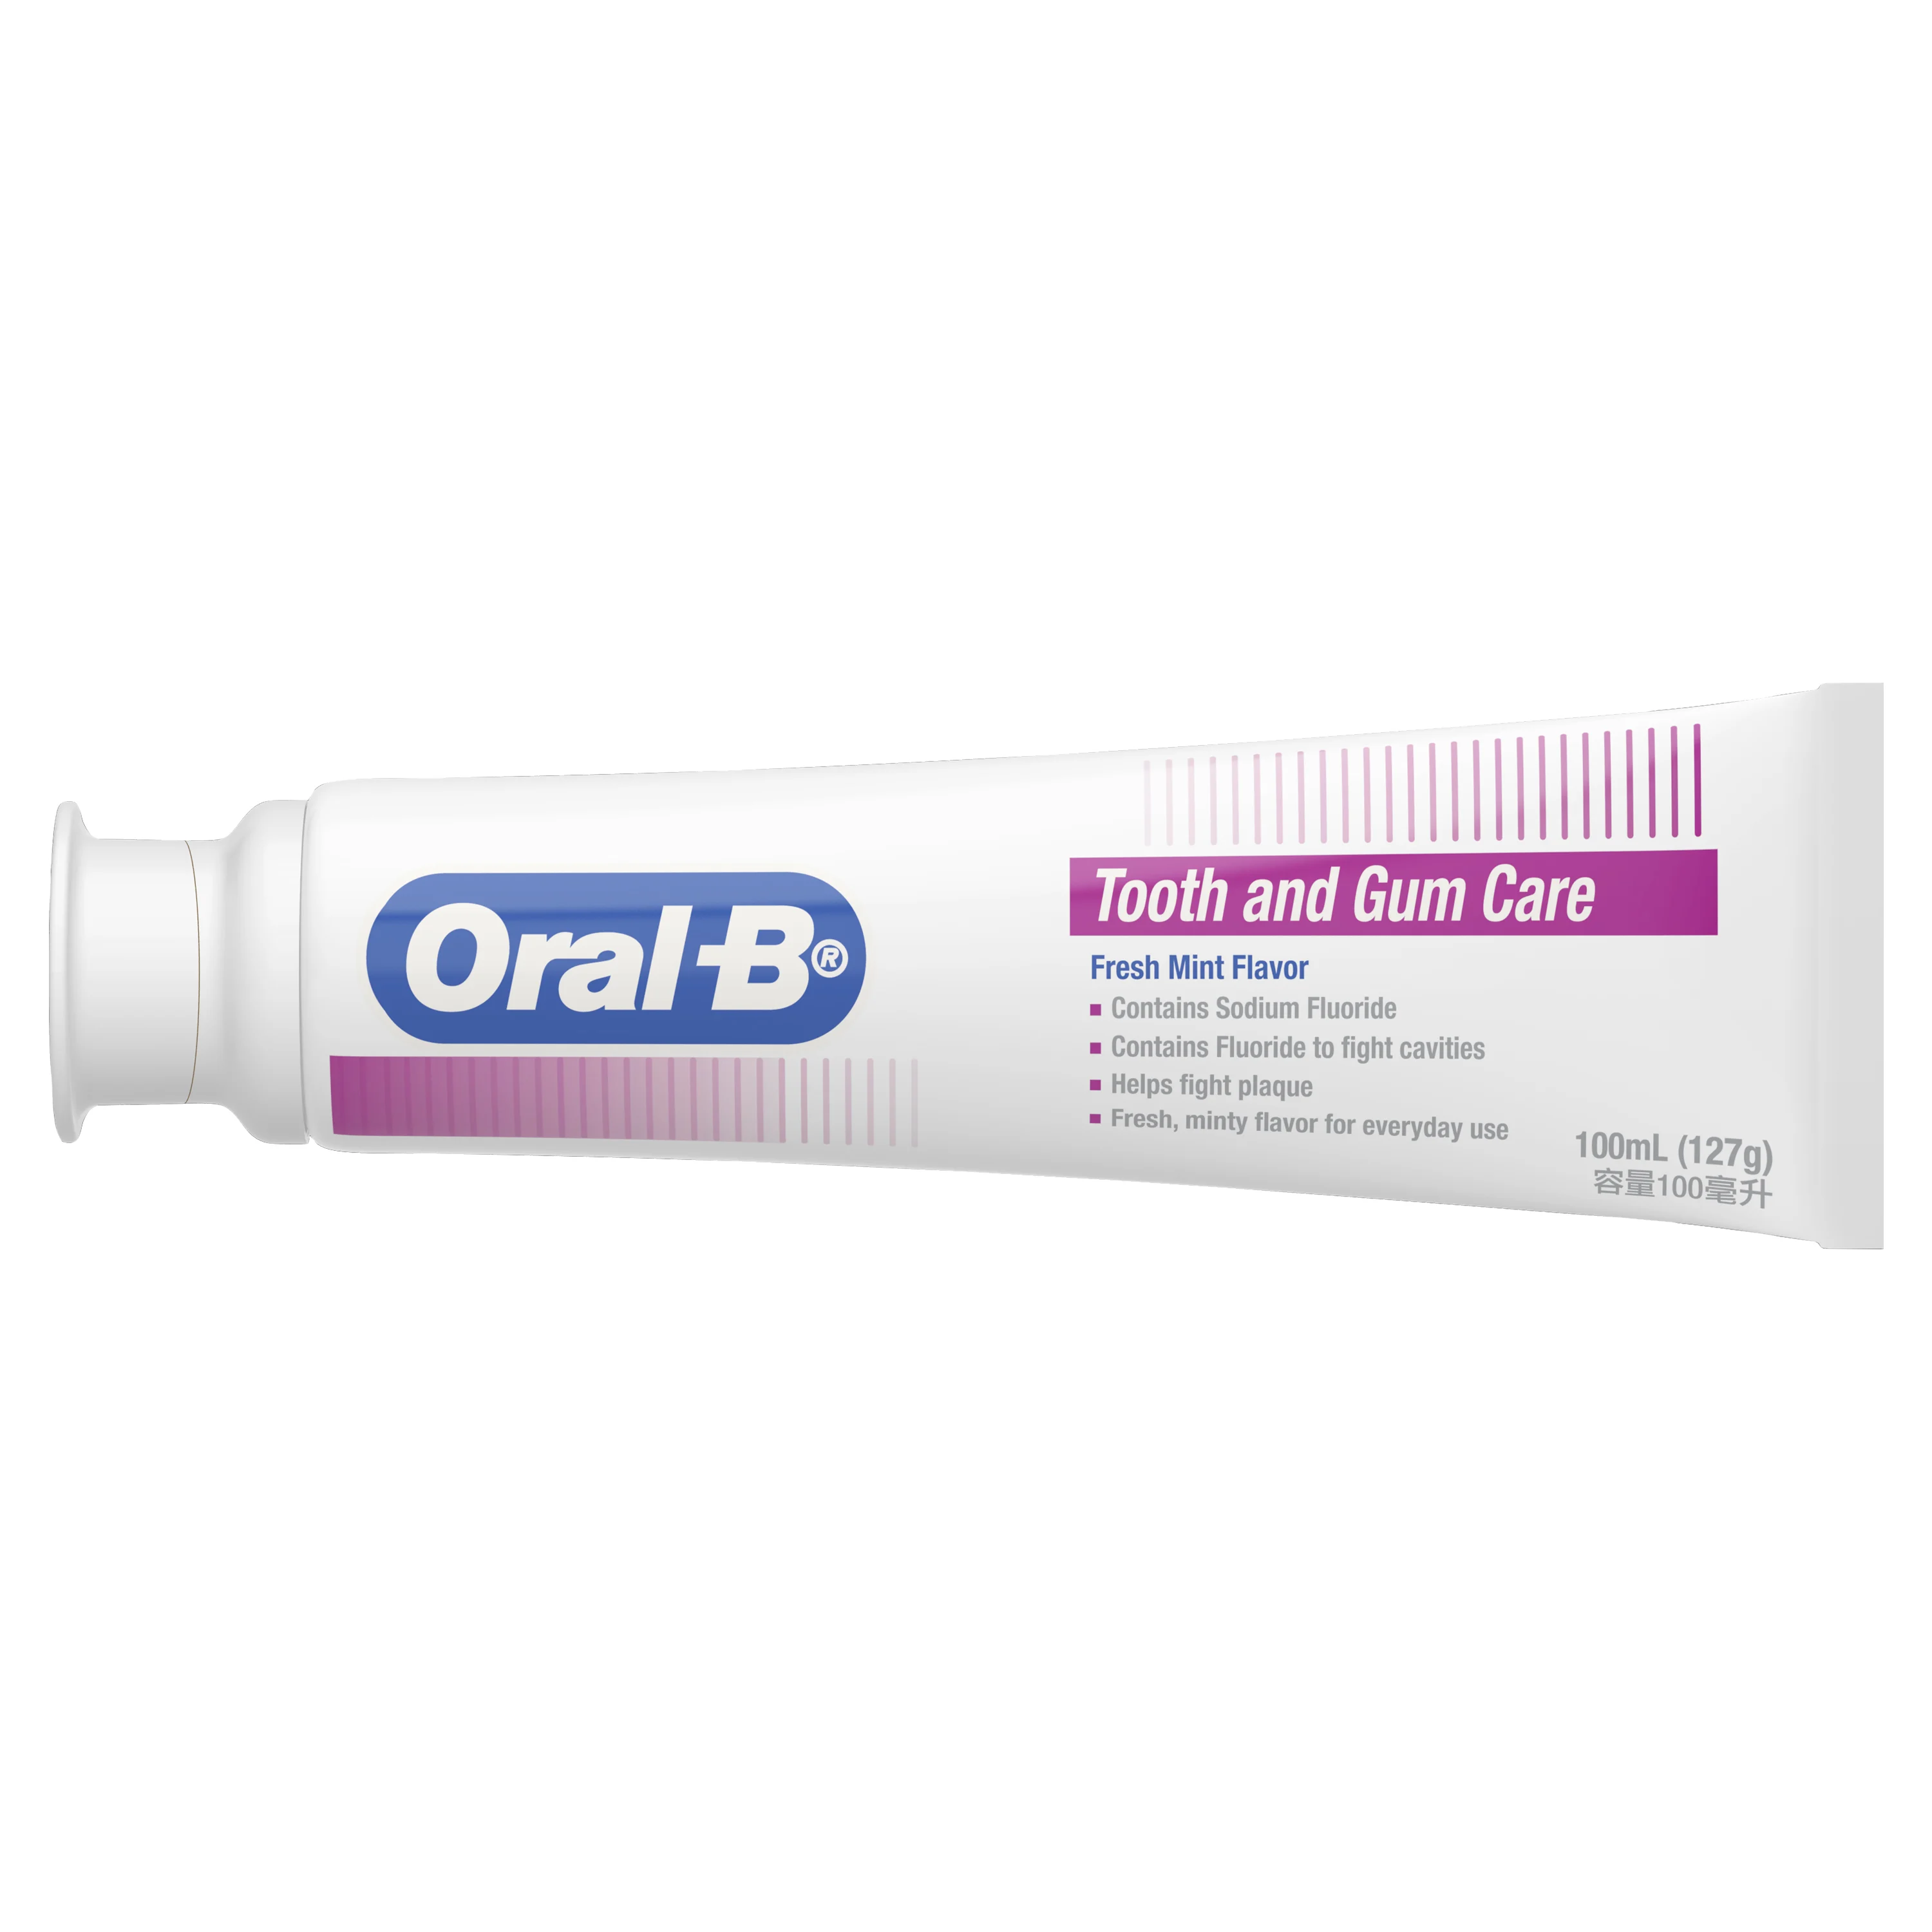 Oral-B Tooth and Gum Care Toothpaste 